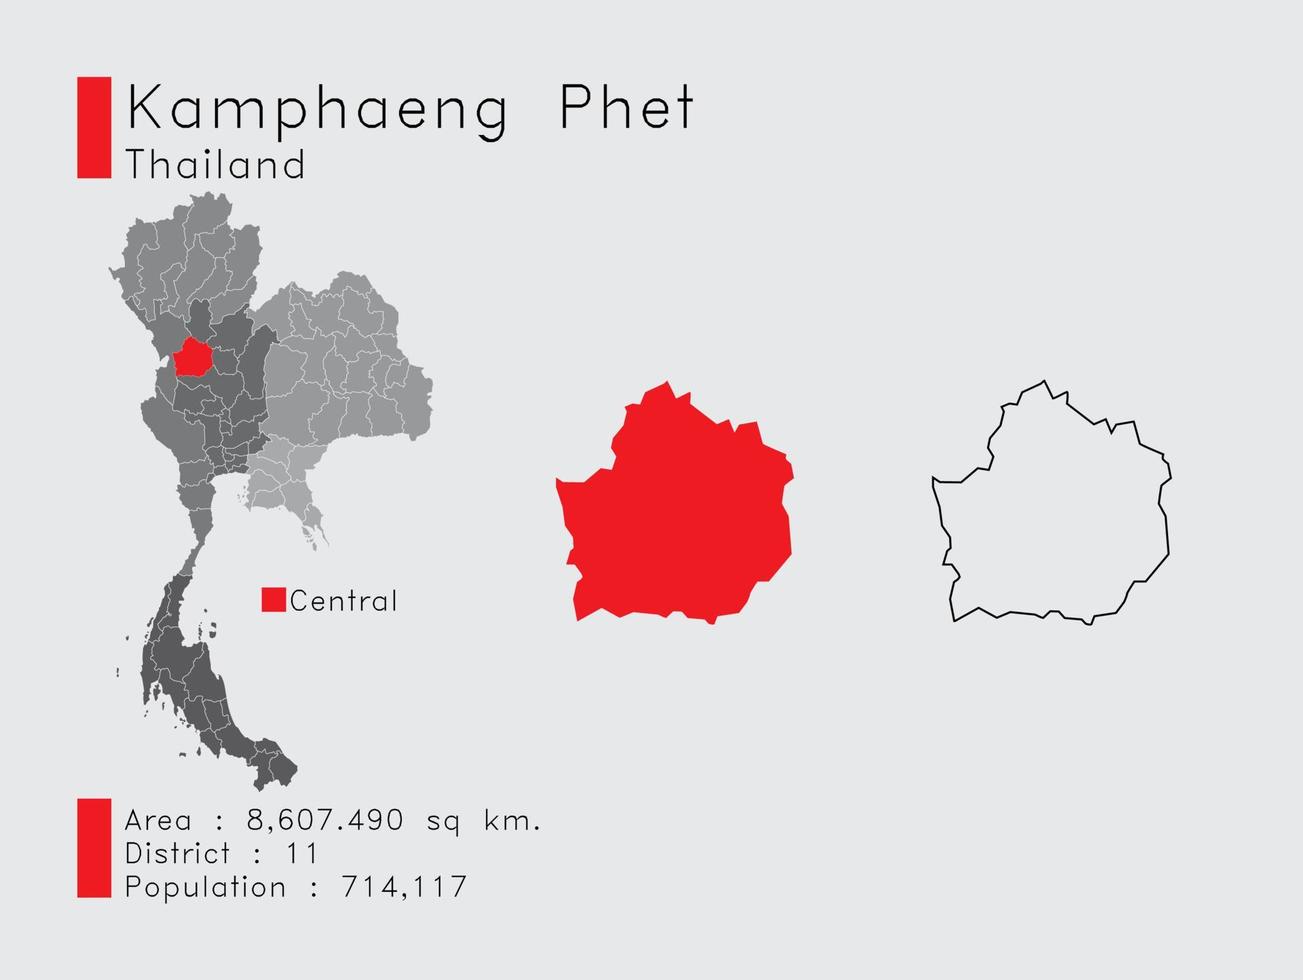 Kamphaeng Phet Position in Thailand A Set of Infographic Elements for the Province. and Area District Population and Outline. Vector with Gray Background.